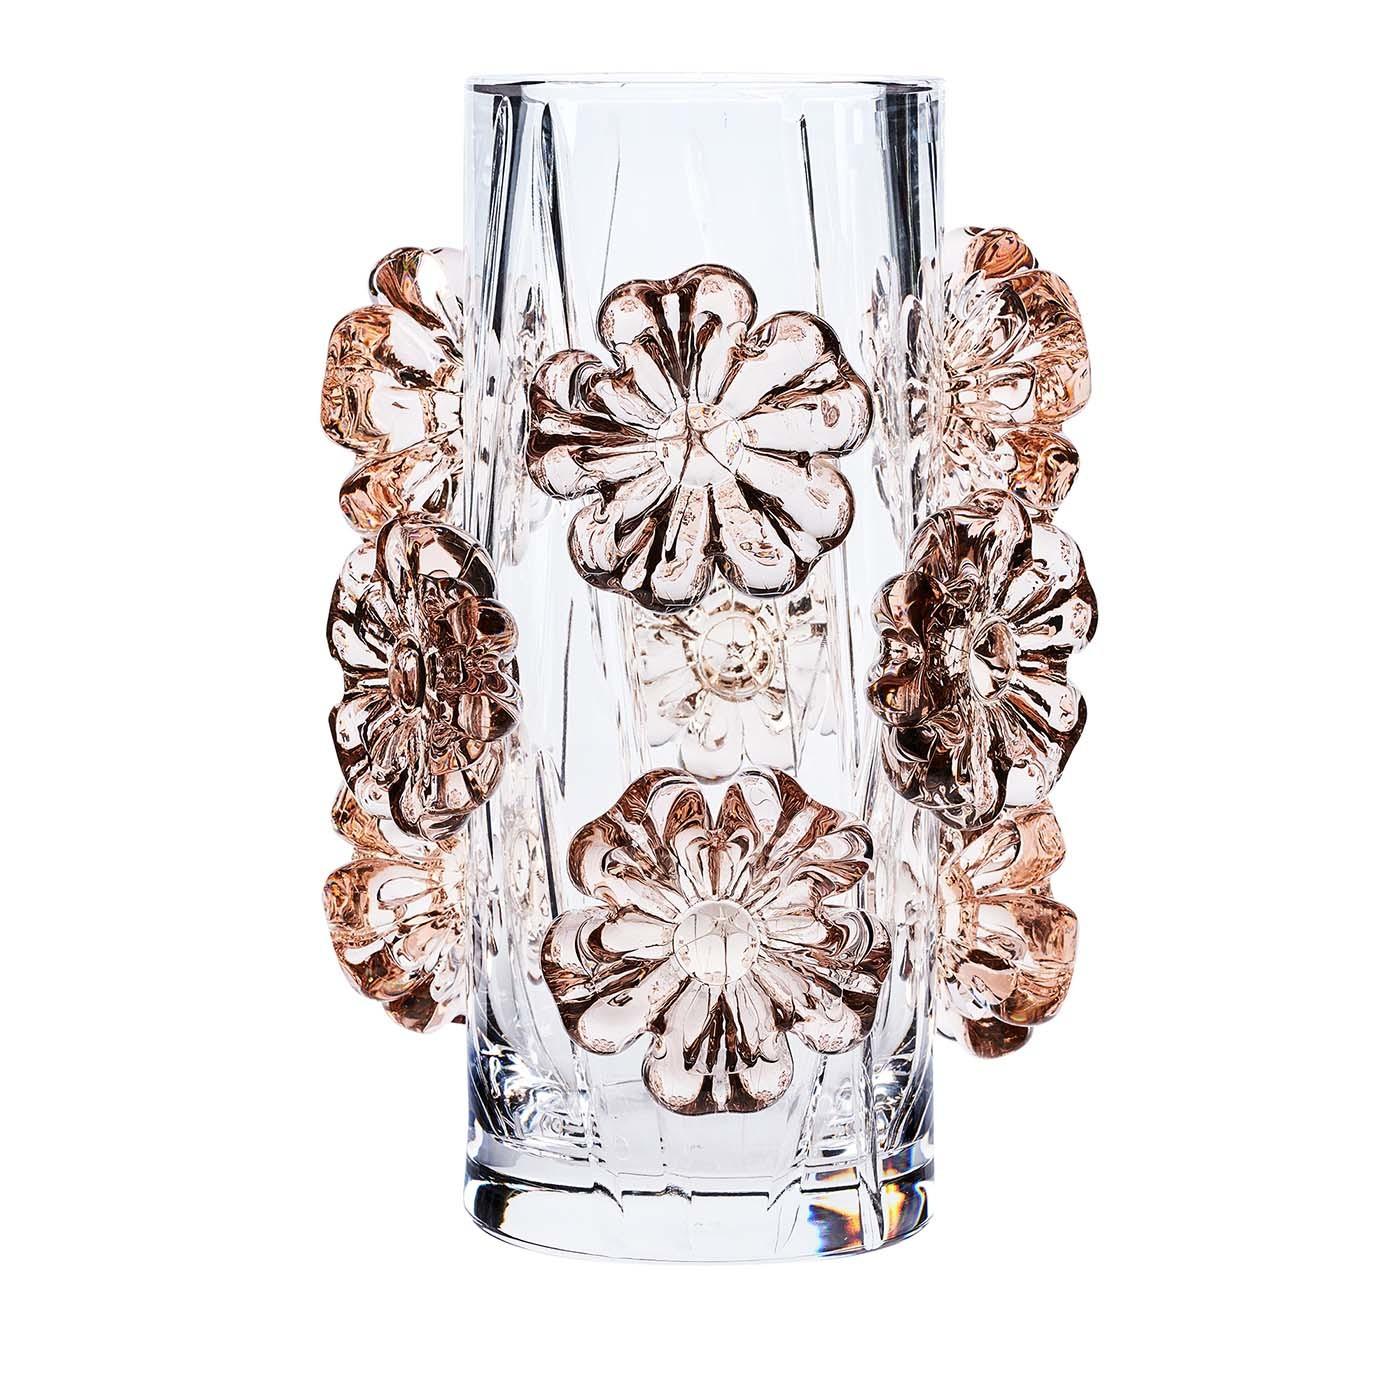 A celebration of the joys of spring, this delicate design will infuse charm and elegance into any interior. This one-of-a-kind piece was crafted entirely by hand using crystal with a PbO content of over 24%. Its transparent cylindrical body is